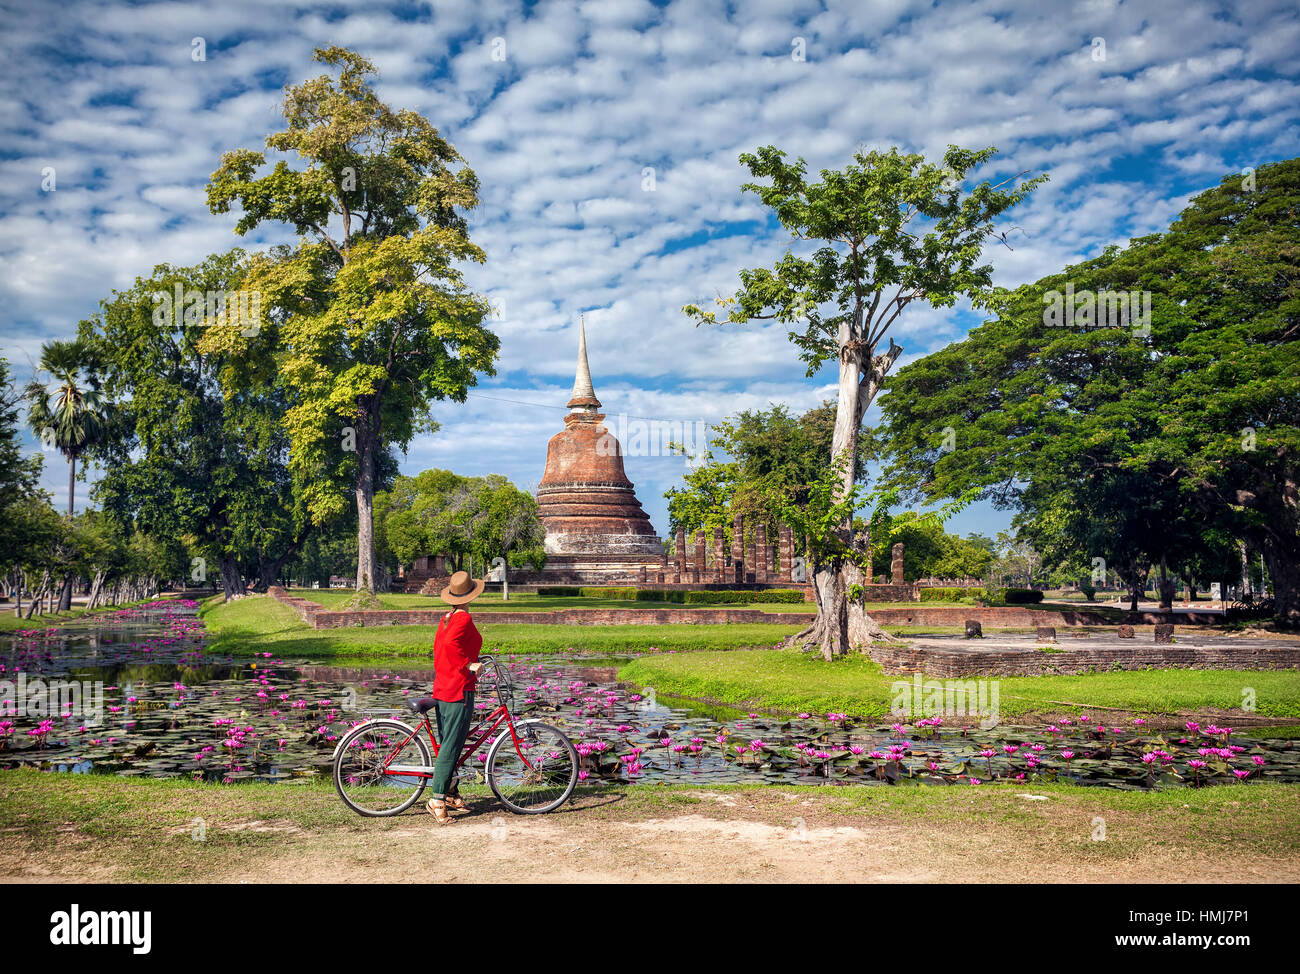 Woman in red shirt riding bicycle near old Buddhist temple in Sukhothai historical park, Thailand Stock Photo